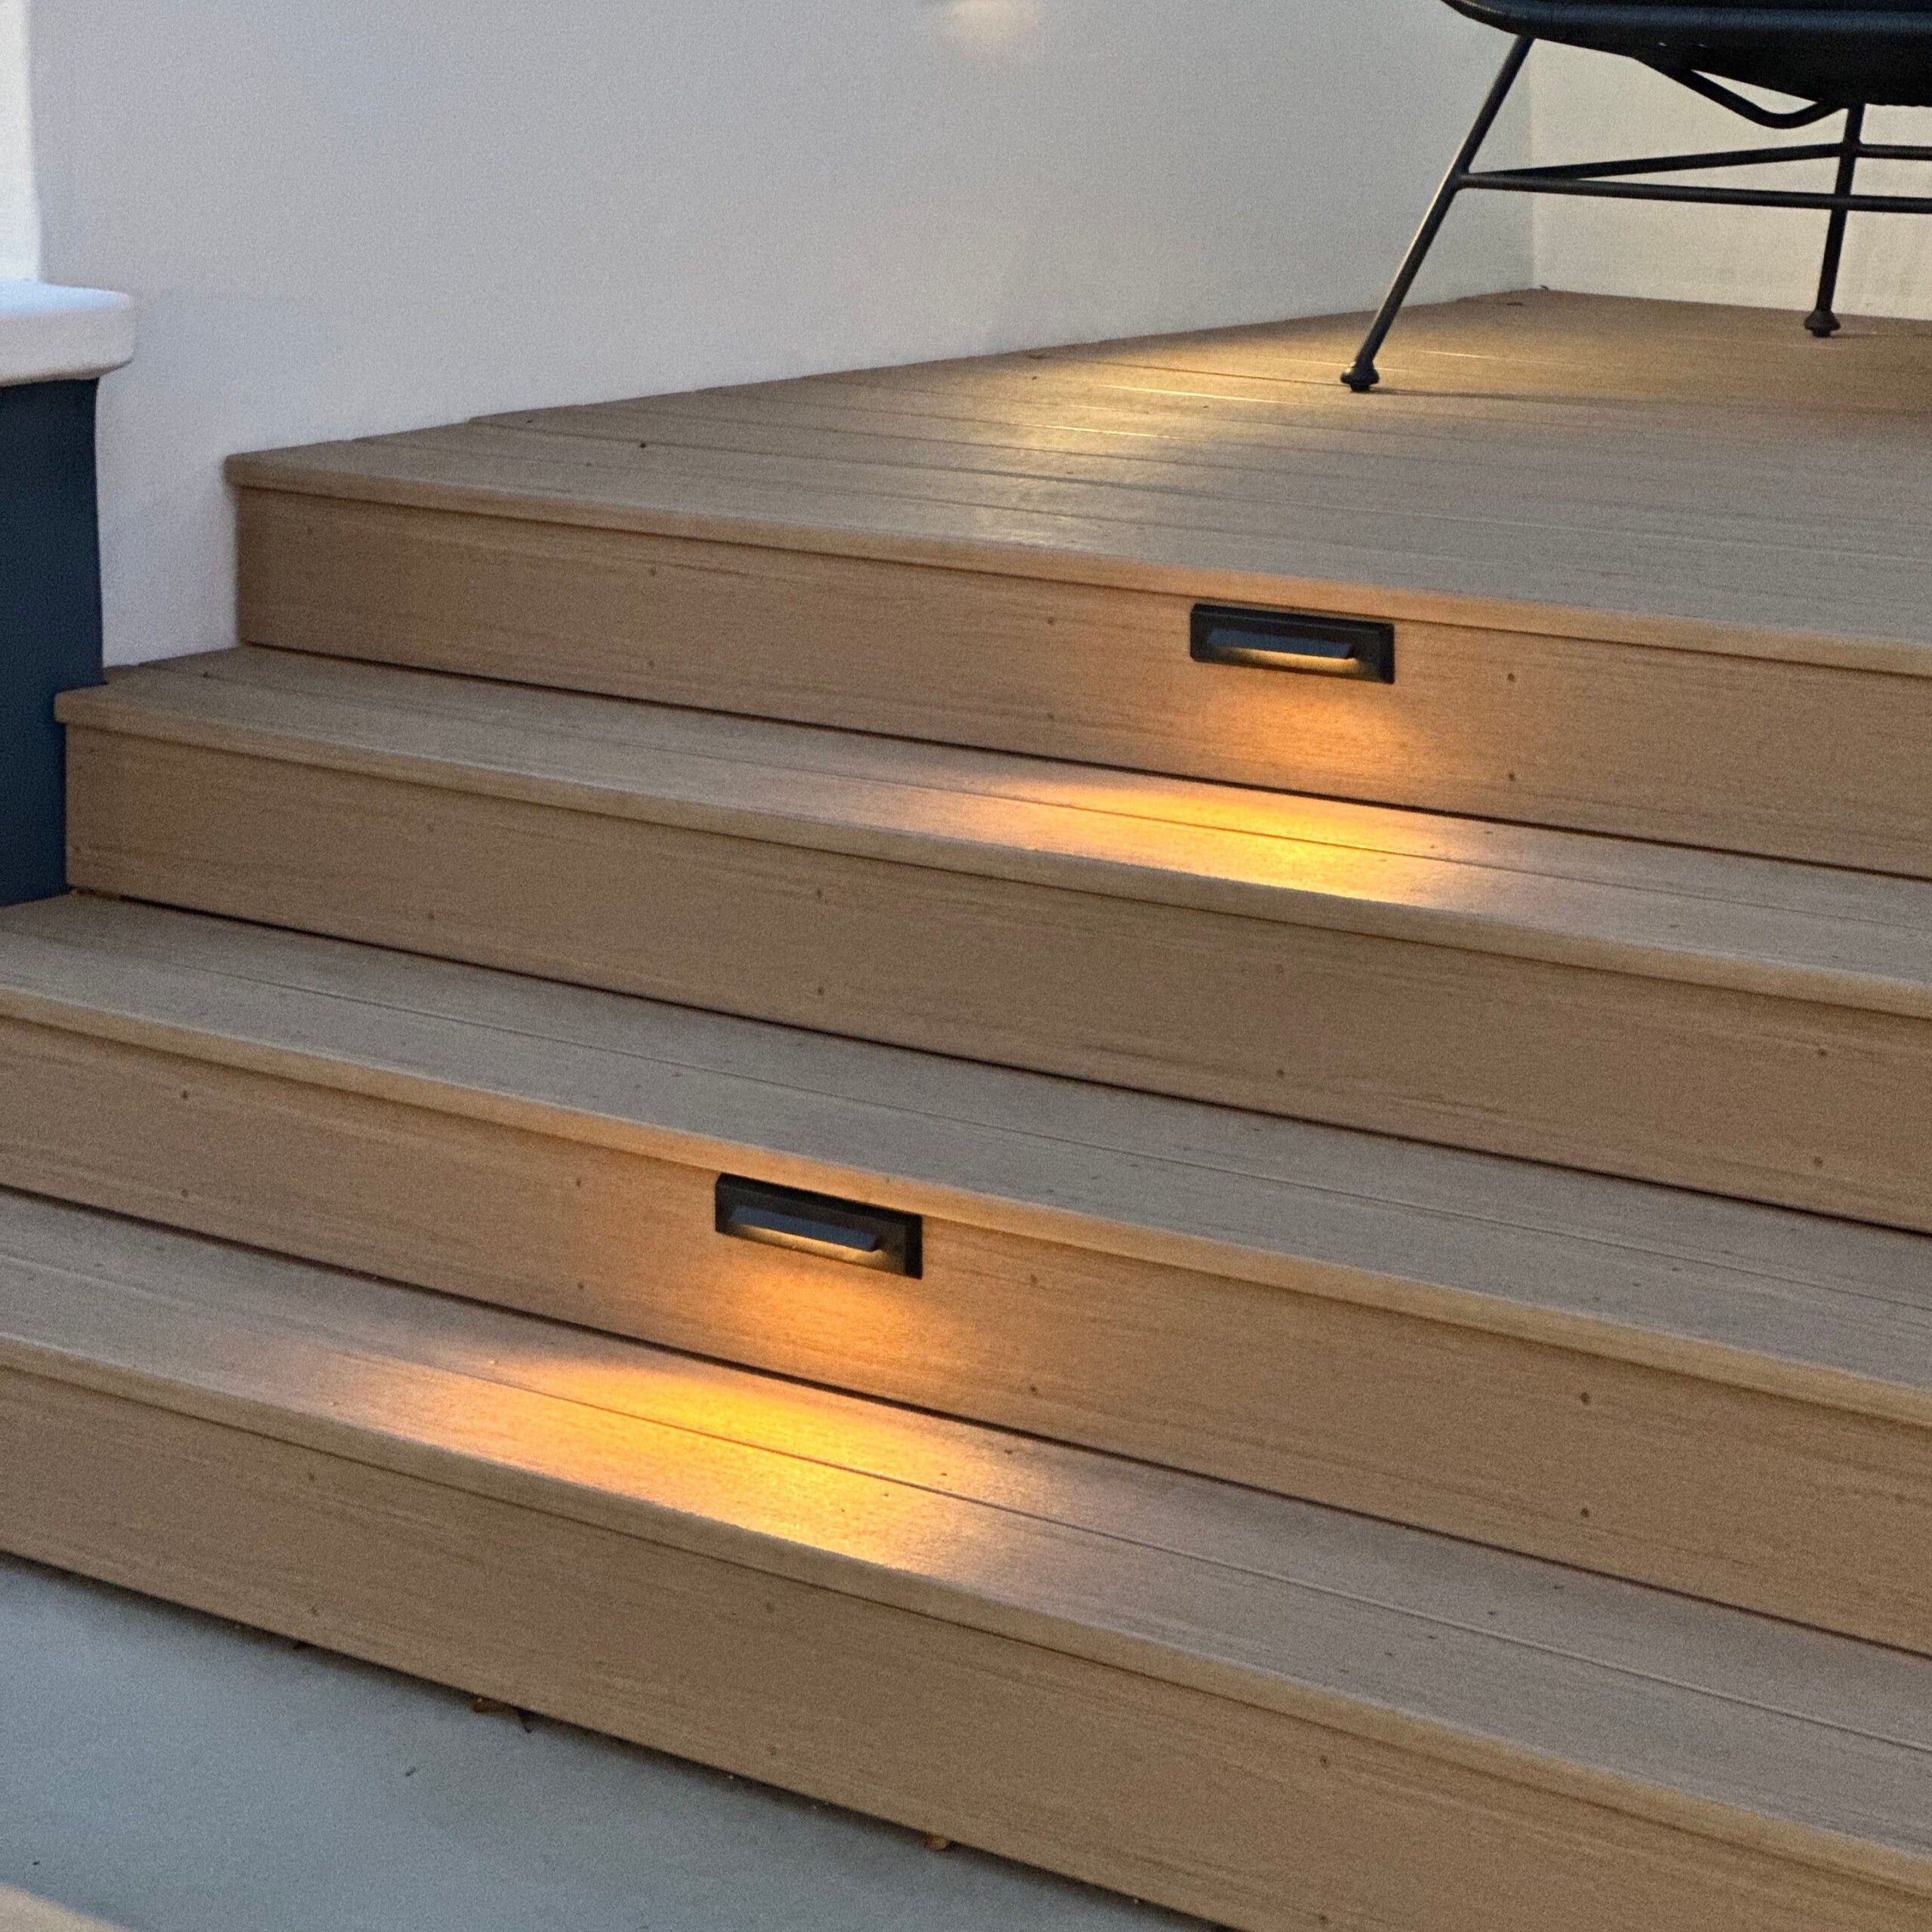 The Benefits of Installing LED Deck Lights in Your Outdoor Space